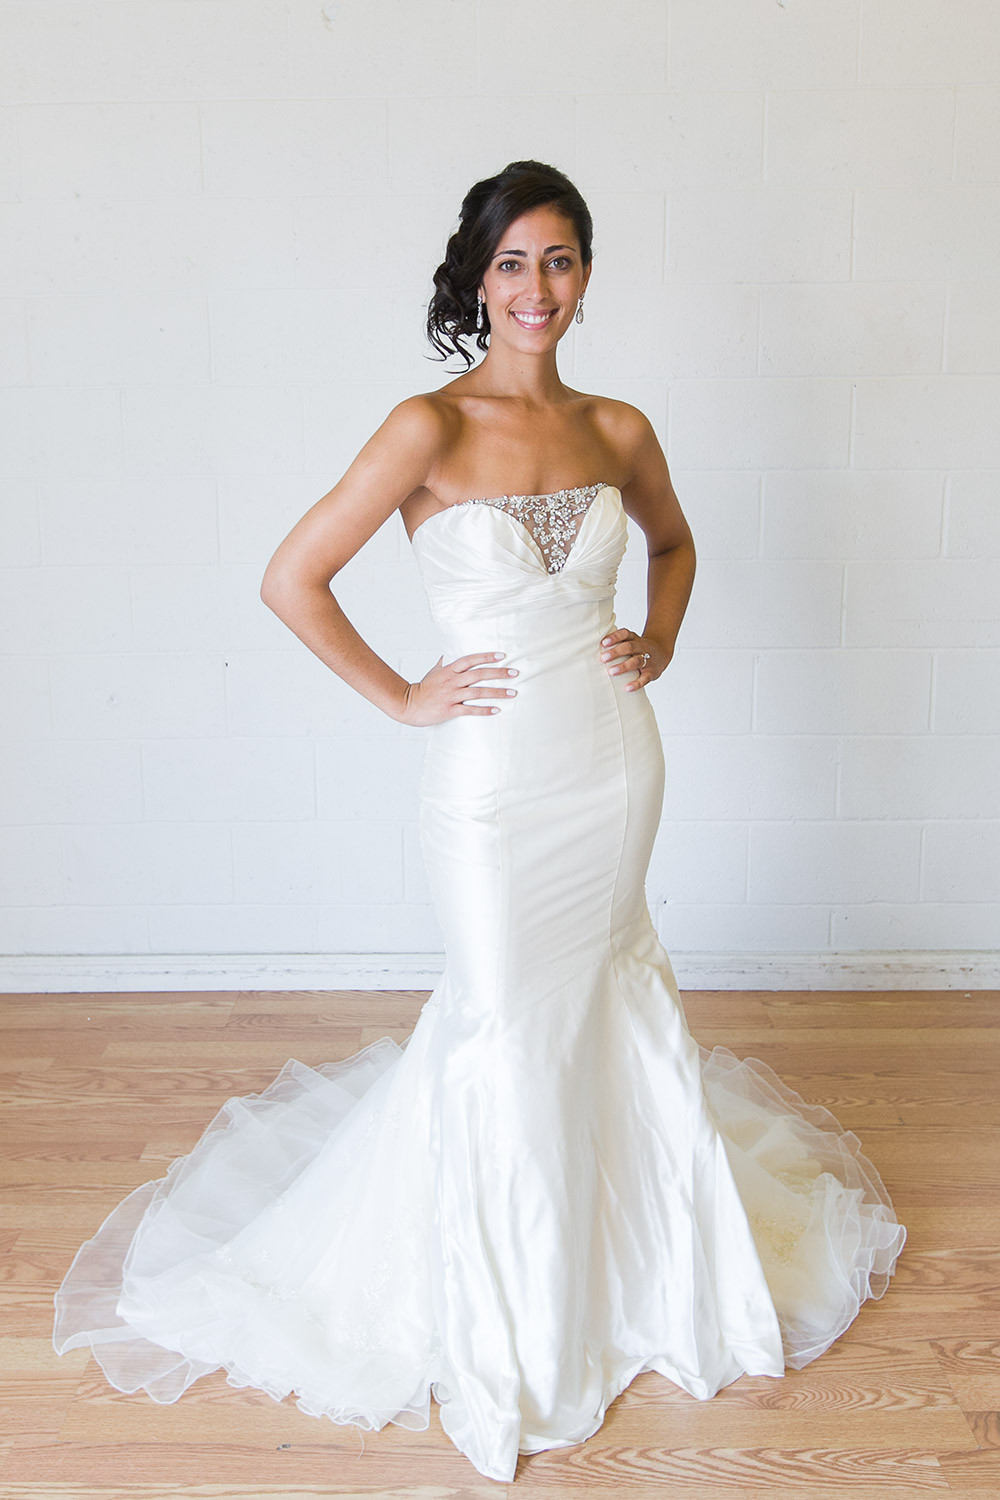 Wedding Gowns For Rent
 The Pros and Cons of a Wedding Dress Rental